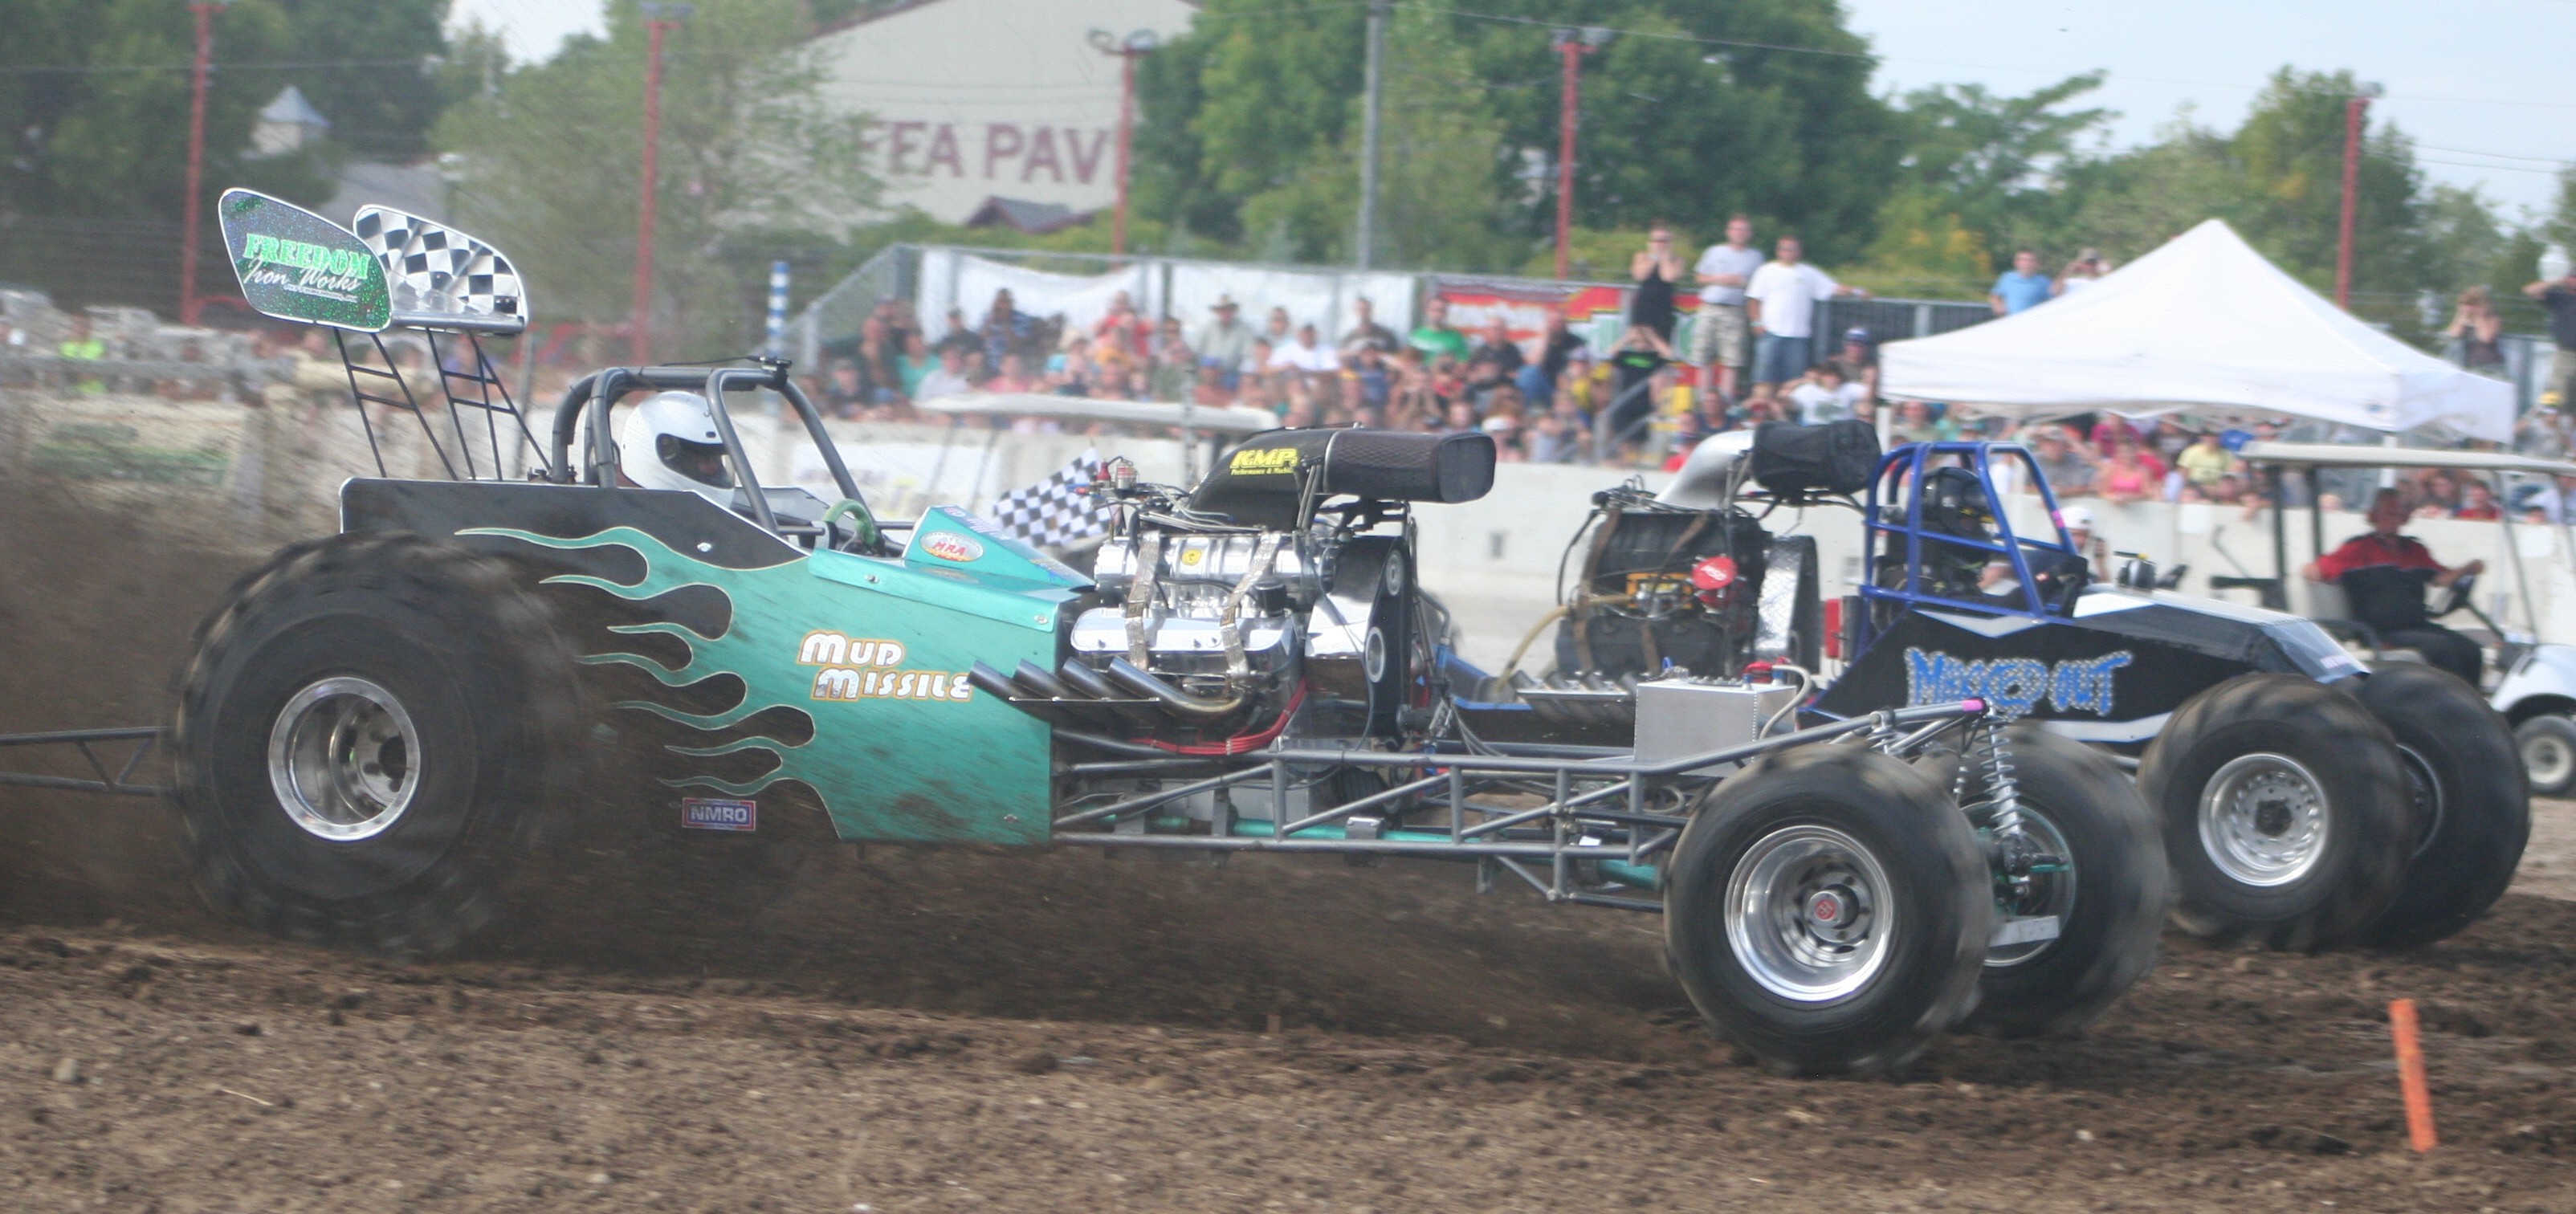 Mud Missile at Indy, 2010